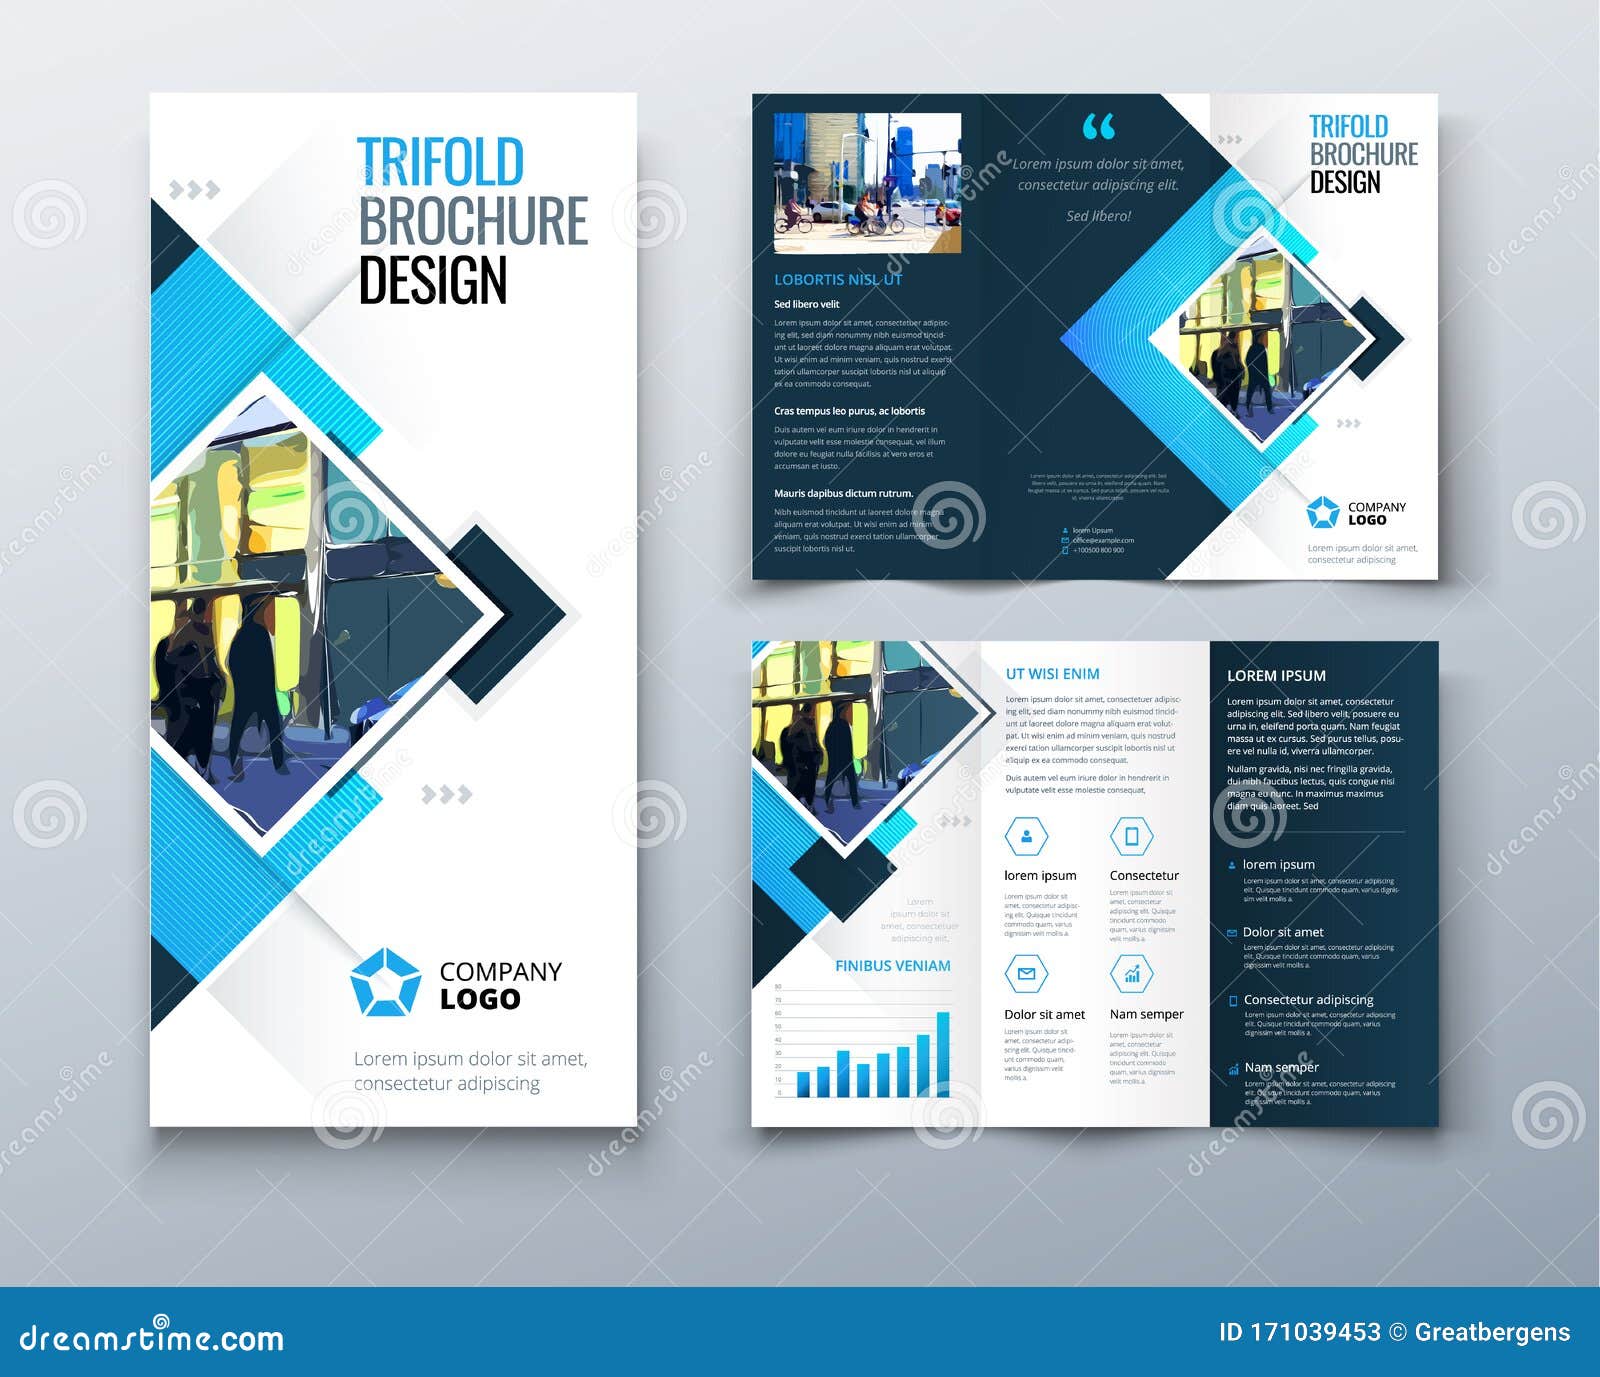 Trifold Brochure Design with Square Shapes, Corporate Business For Three Fold Flyer Templates Free